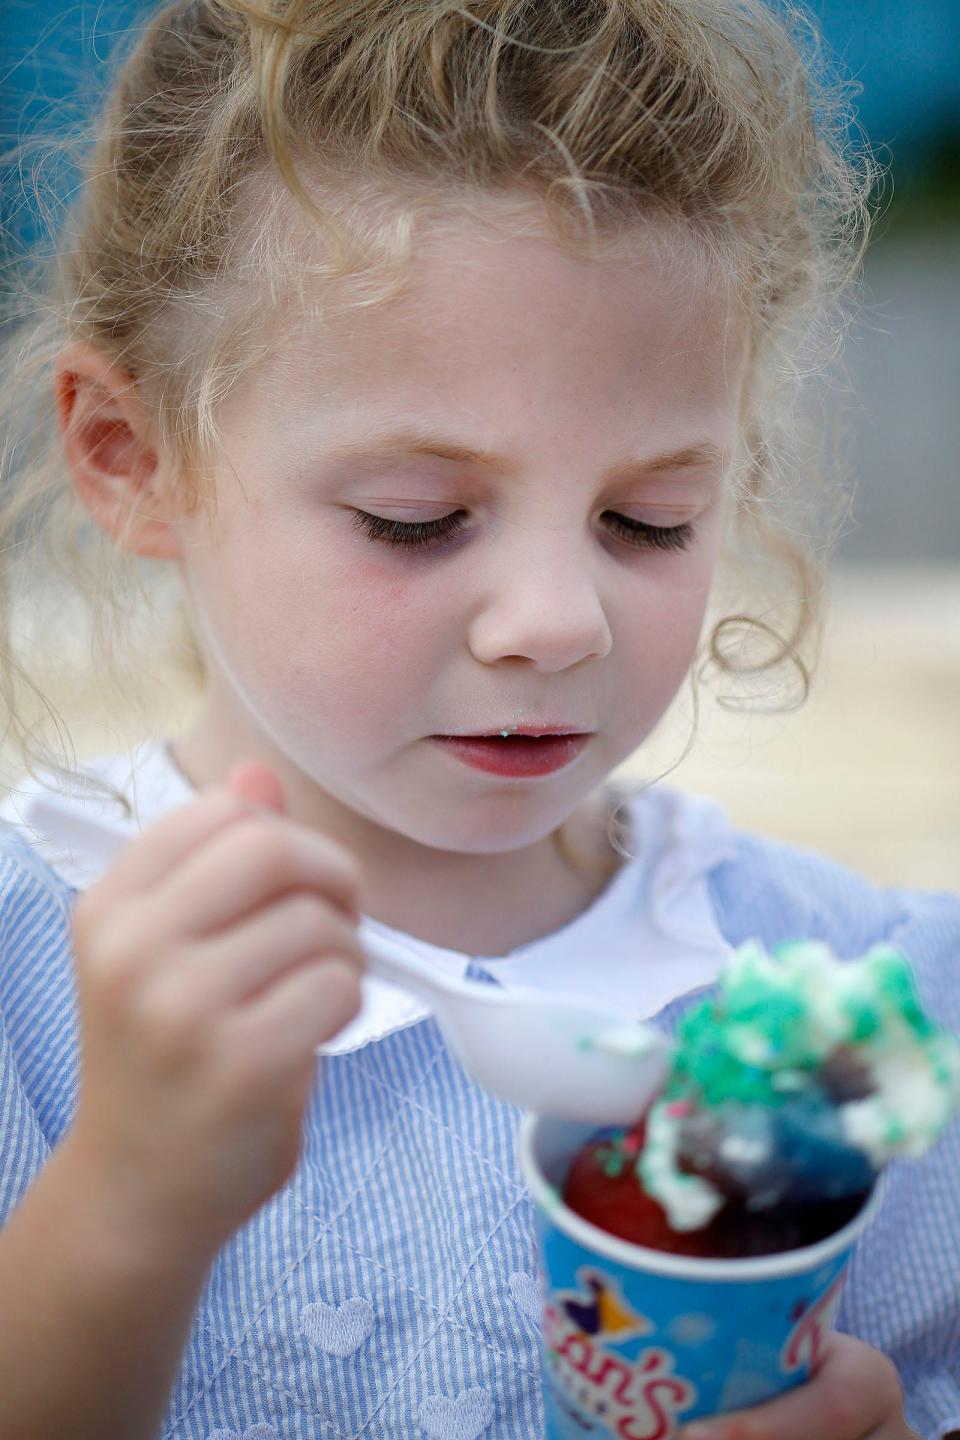 Addie Coppenrath, 5, enjoys a Unicorn shaved ice at Pelican's SnoBalls in Brant Rock on Thursday, Aug. 18, 2022.